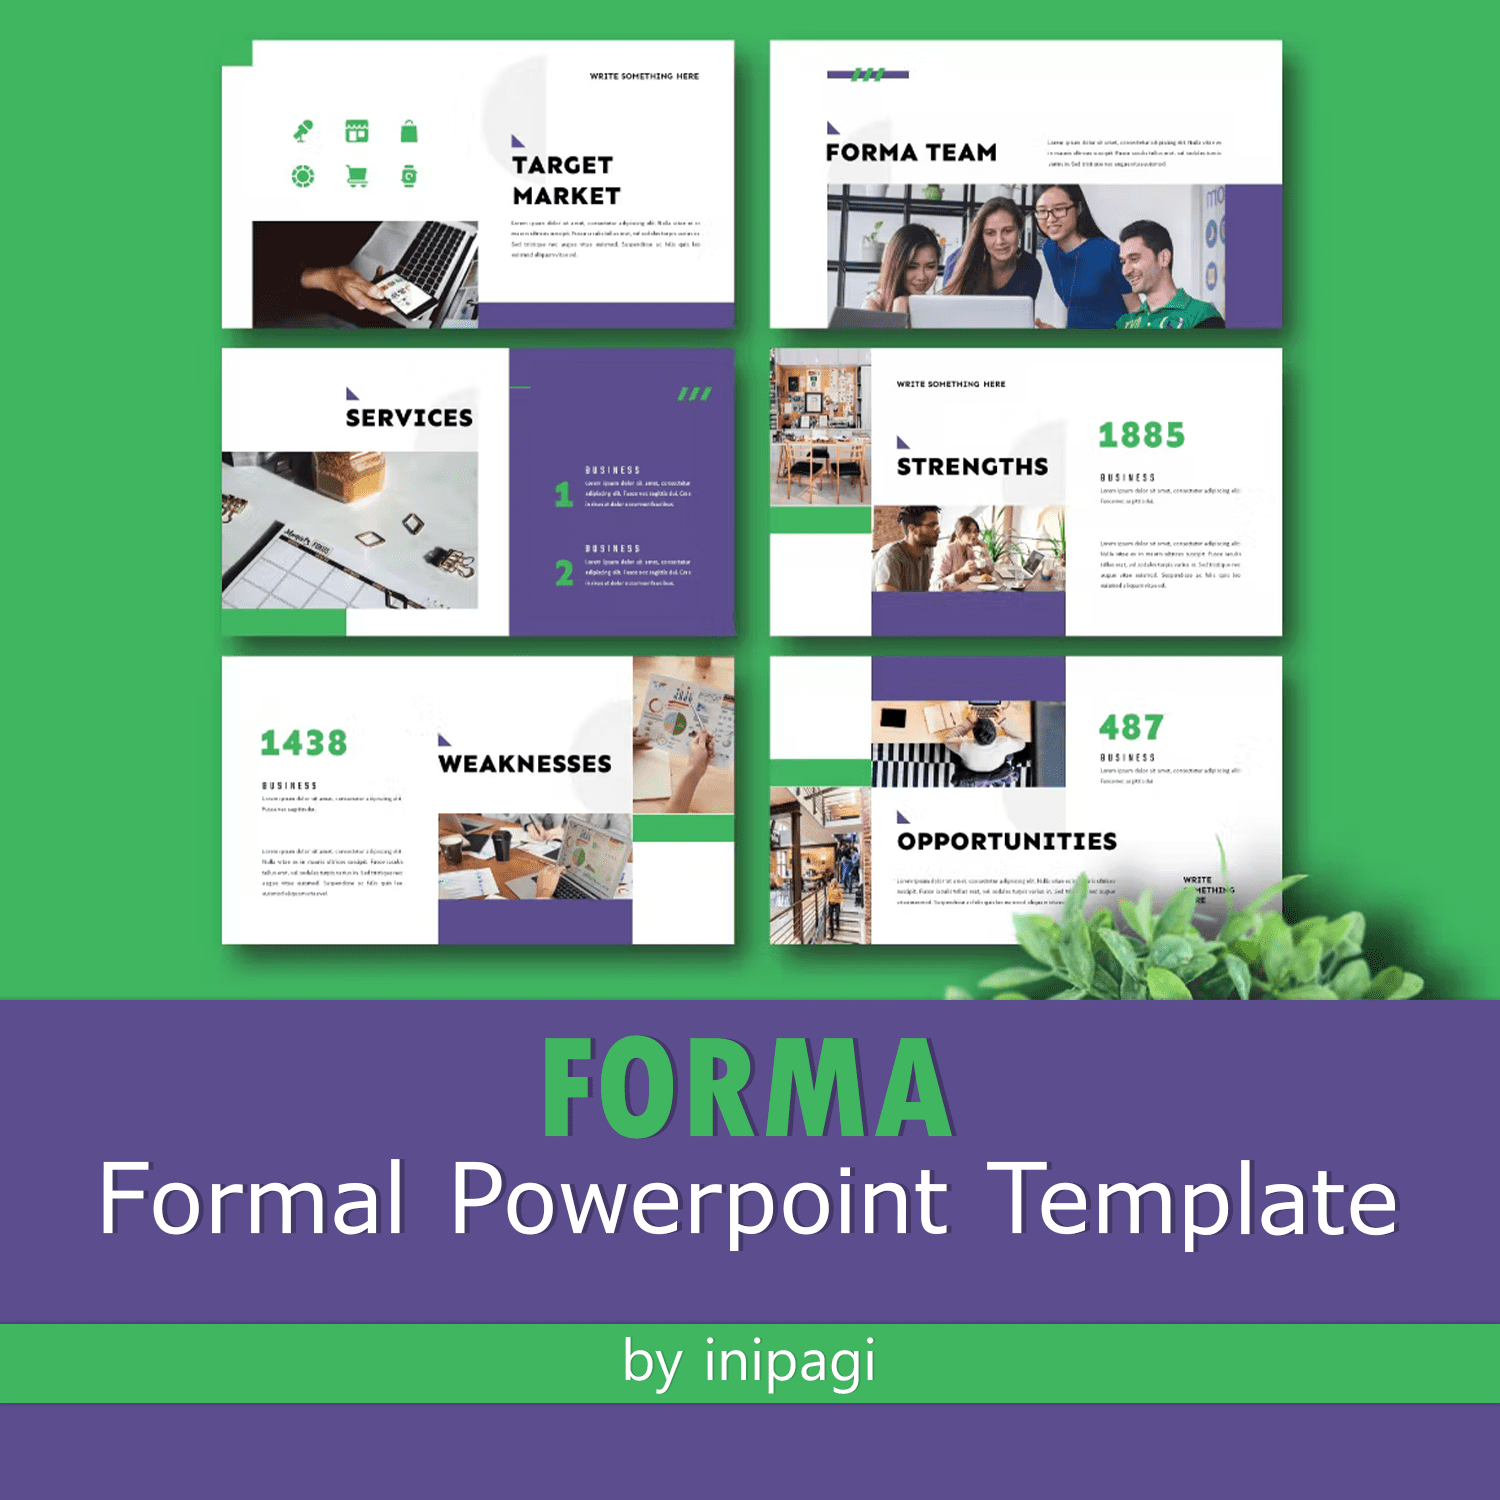 Forma - Formal Powerpoint Template Cover.